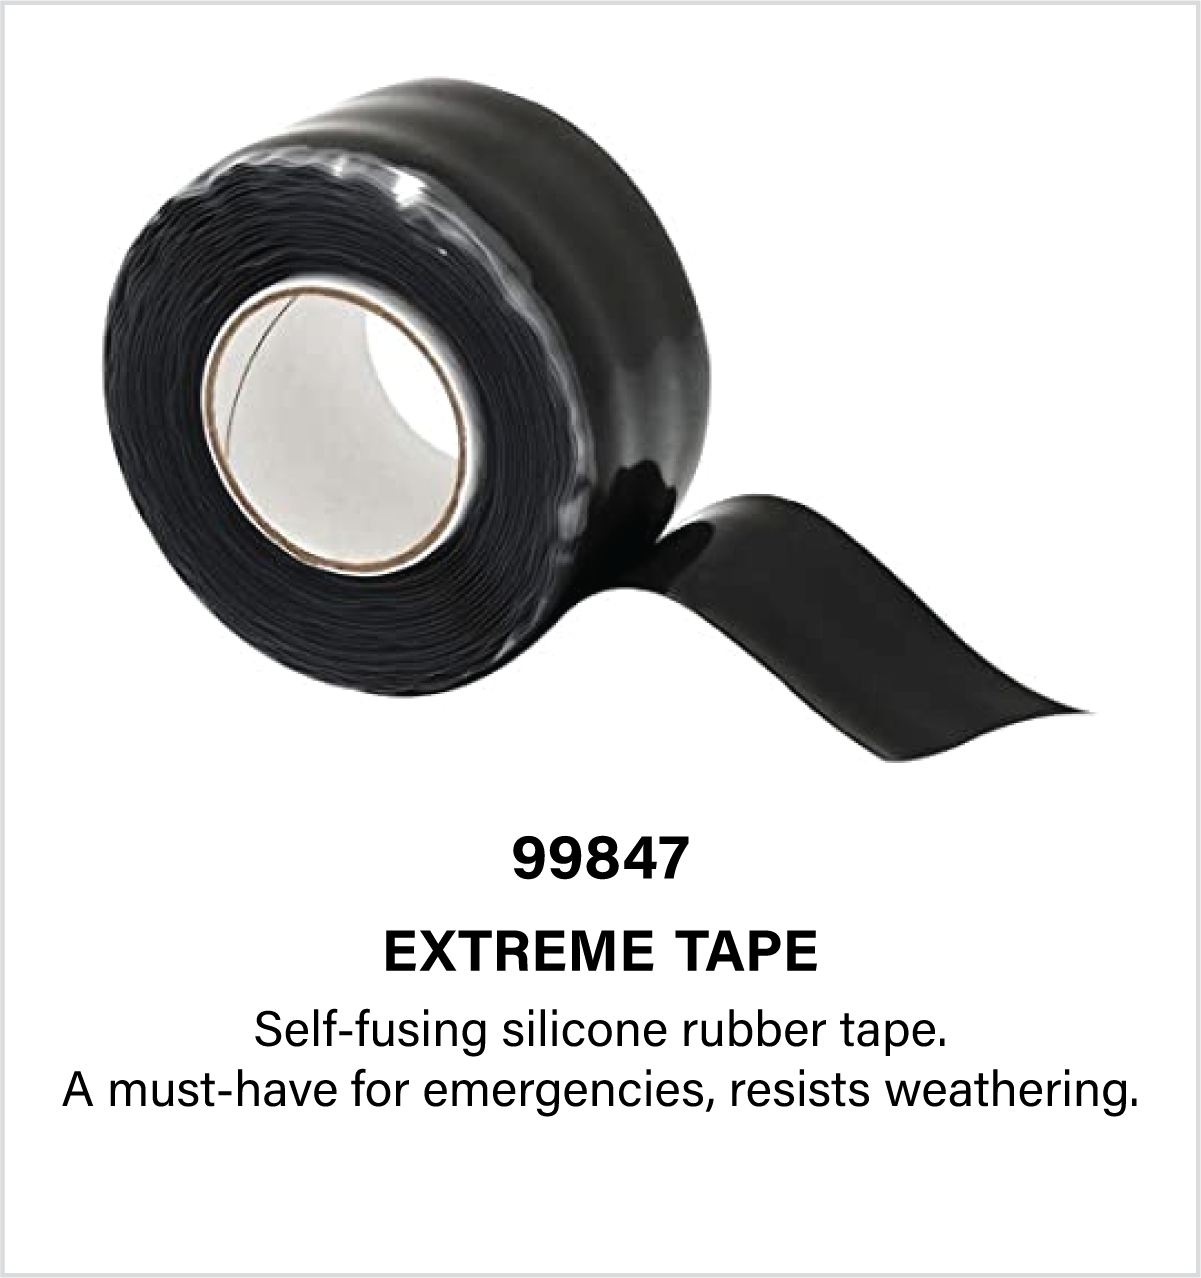 Winter Safety_Extreme Tape